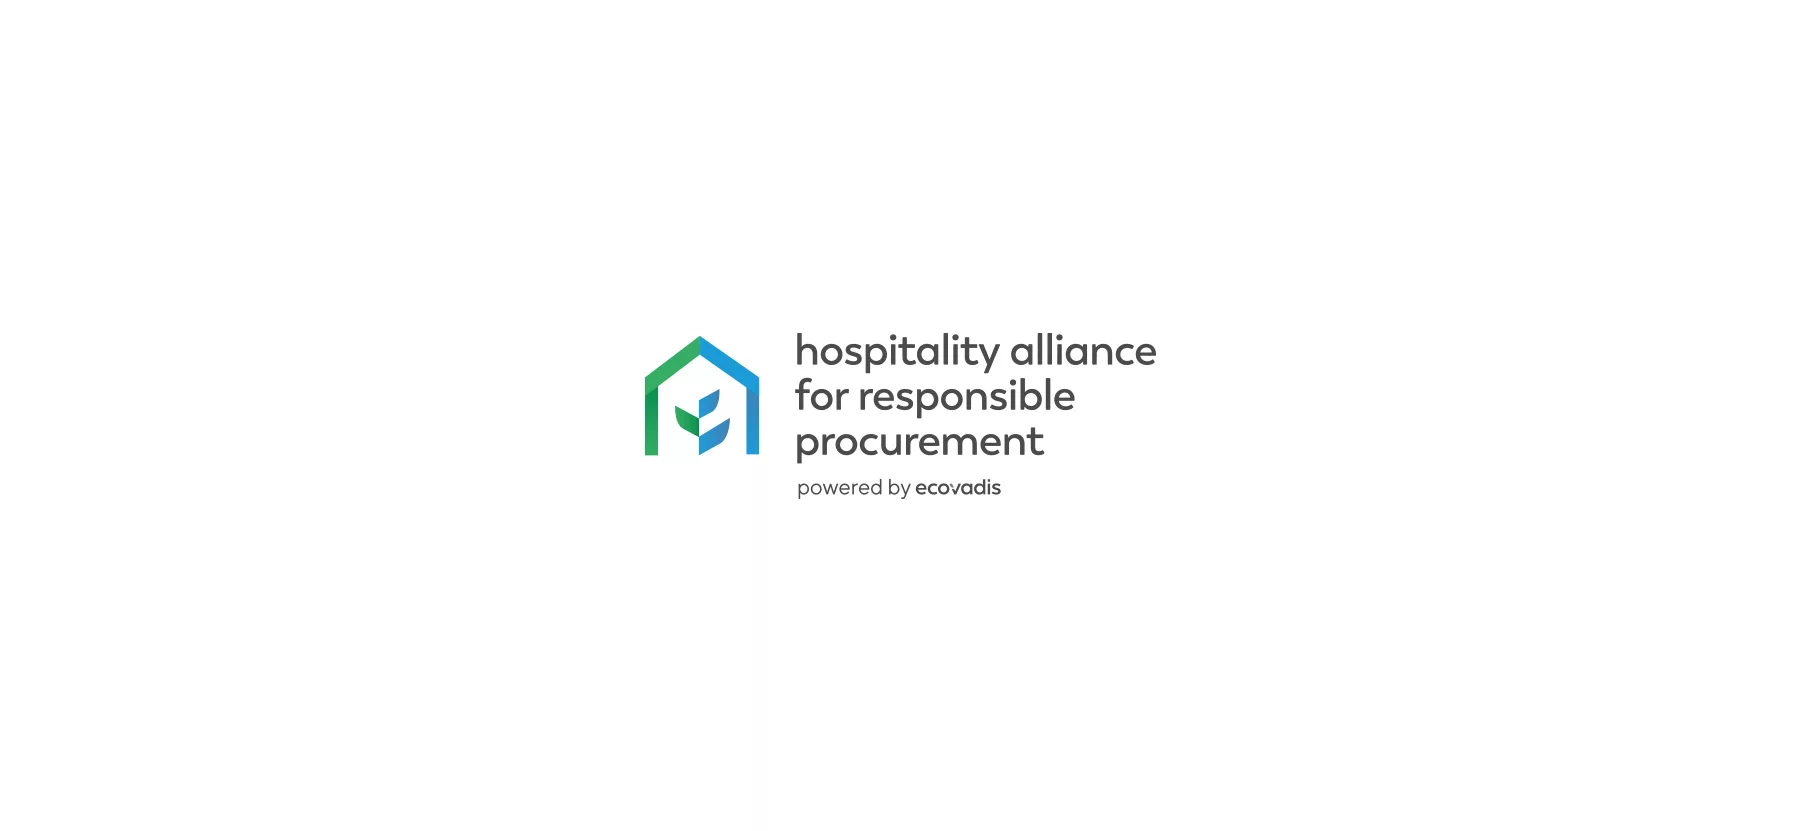 Accor Co-Founding “Hospitality Alliance for Responsible Procurement”